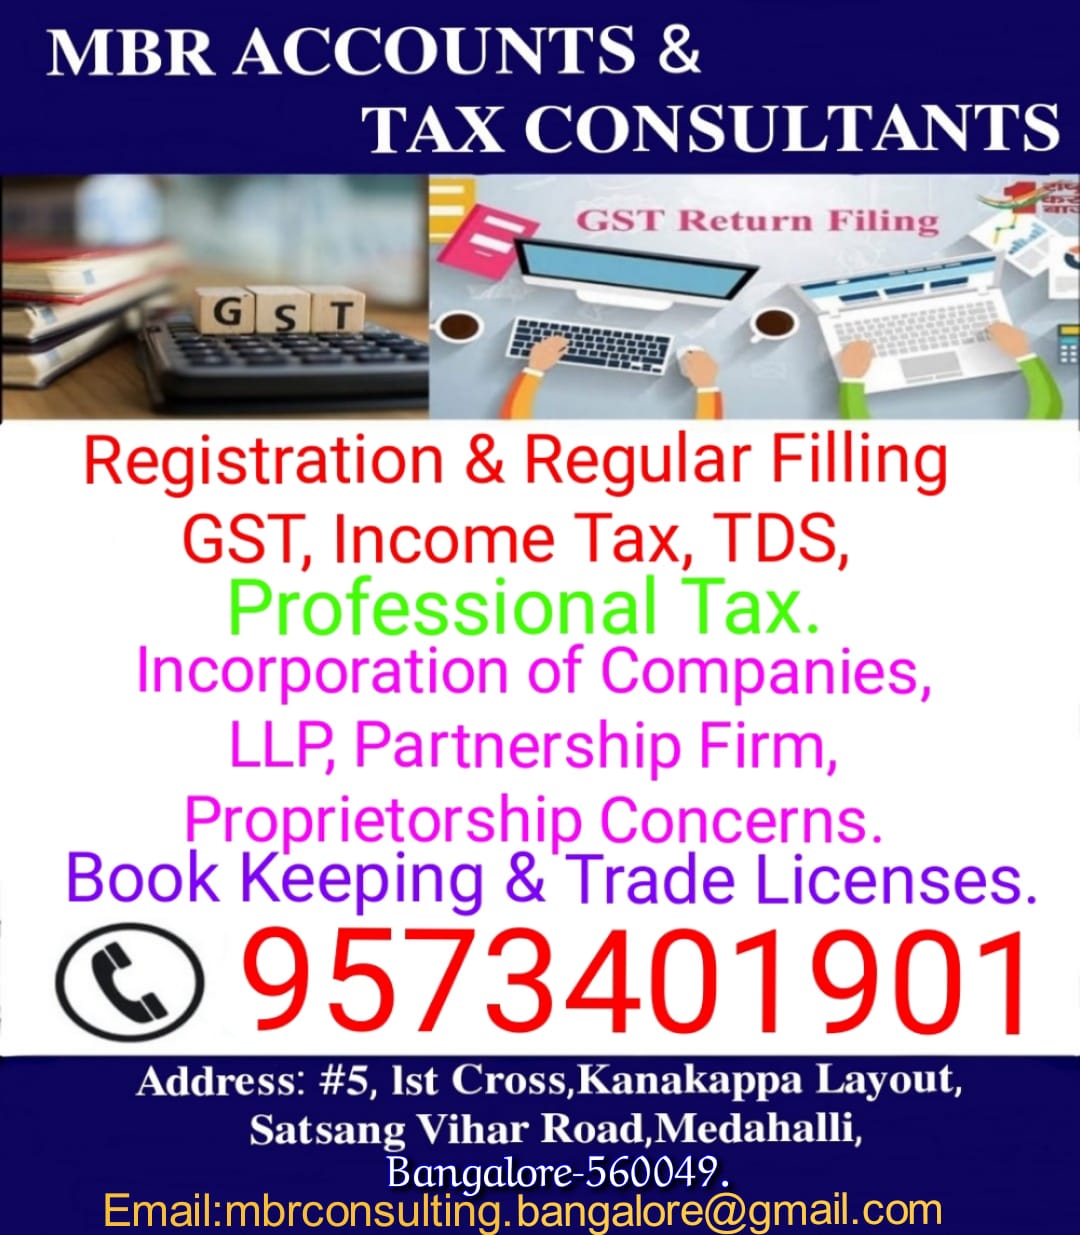 MBR Accounts & Tax Consultants